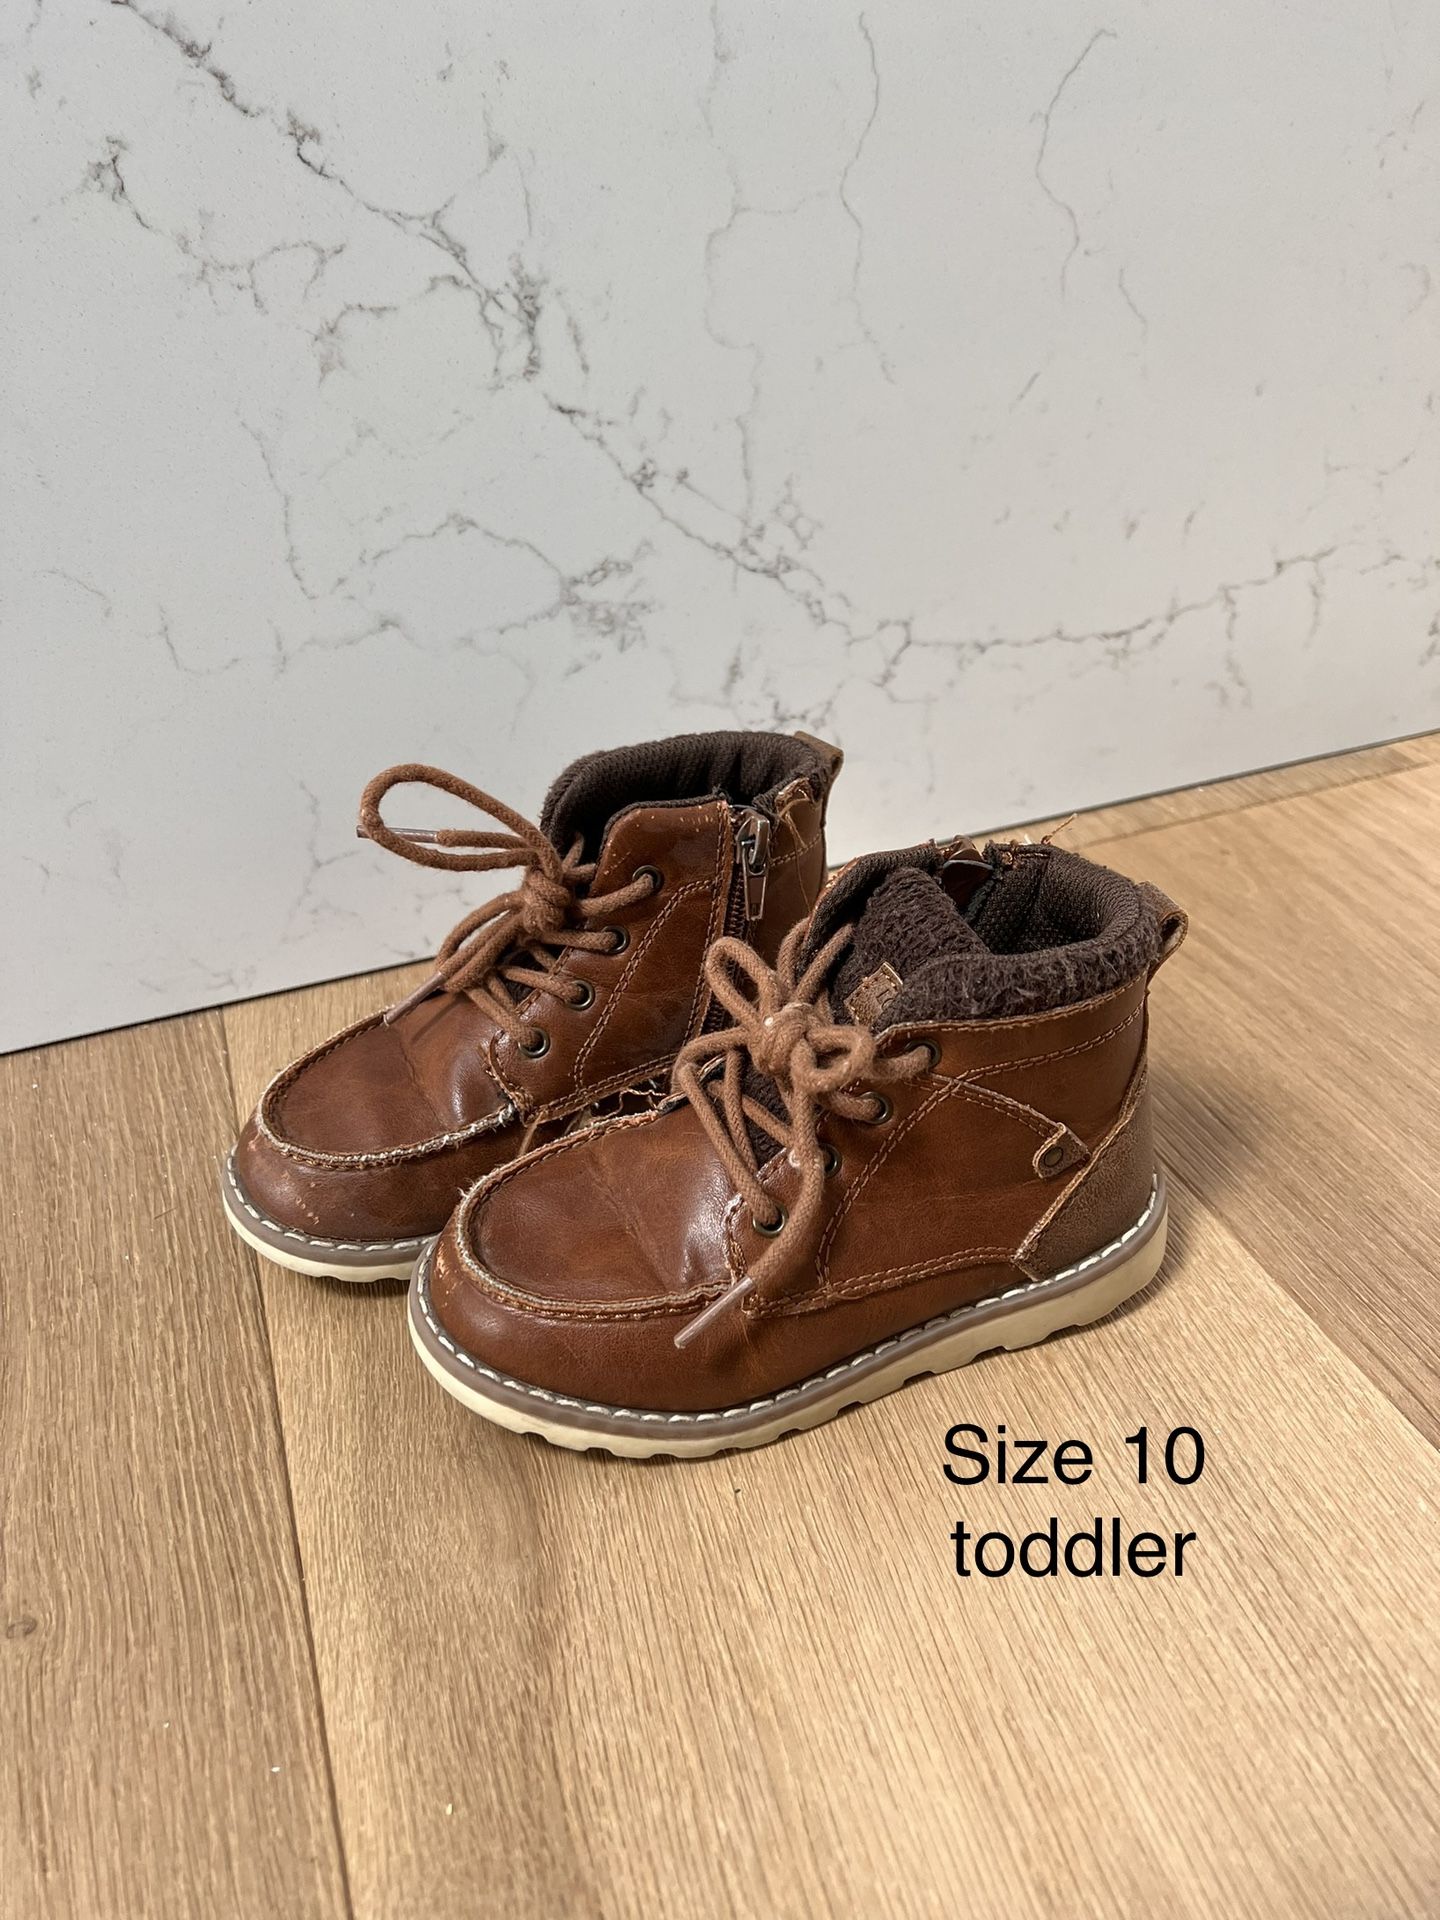 Toddler Boots/Shoes Size 10